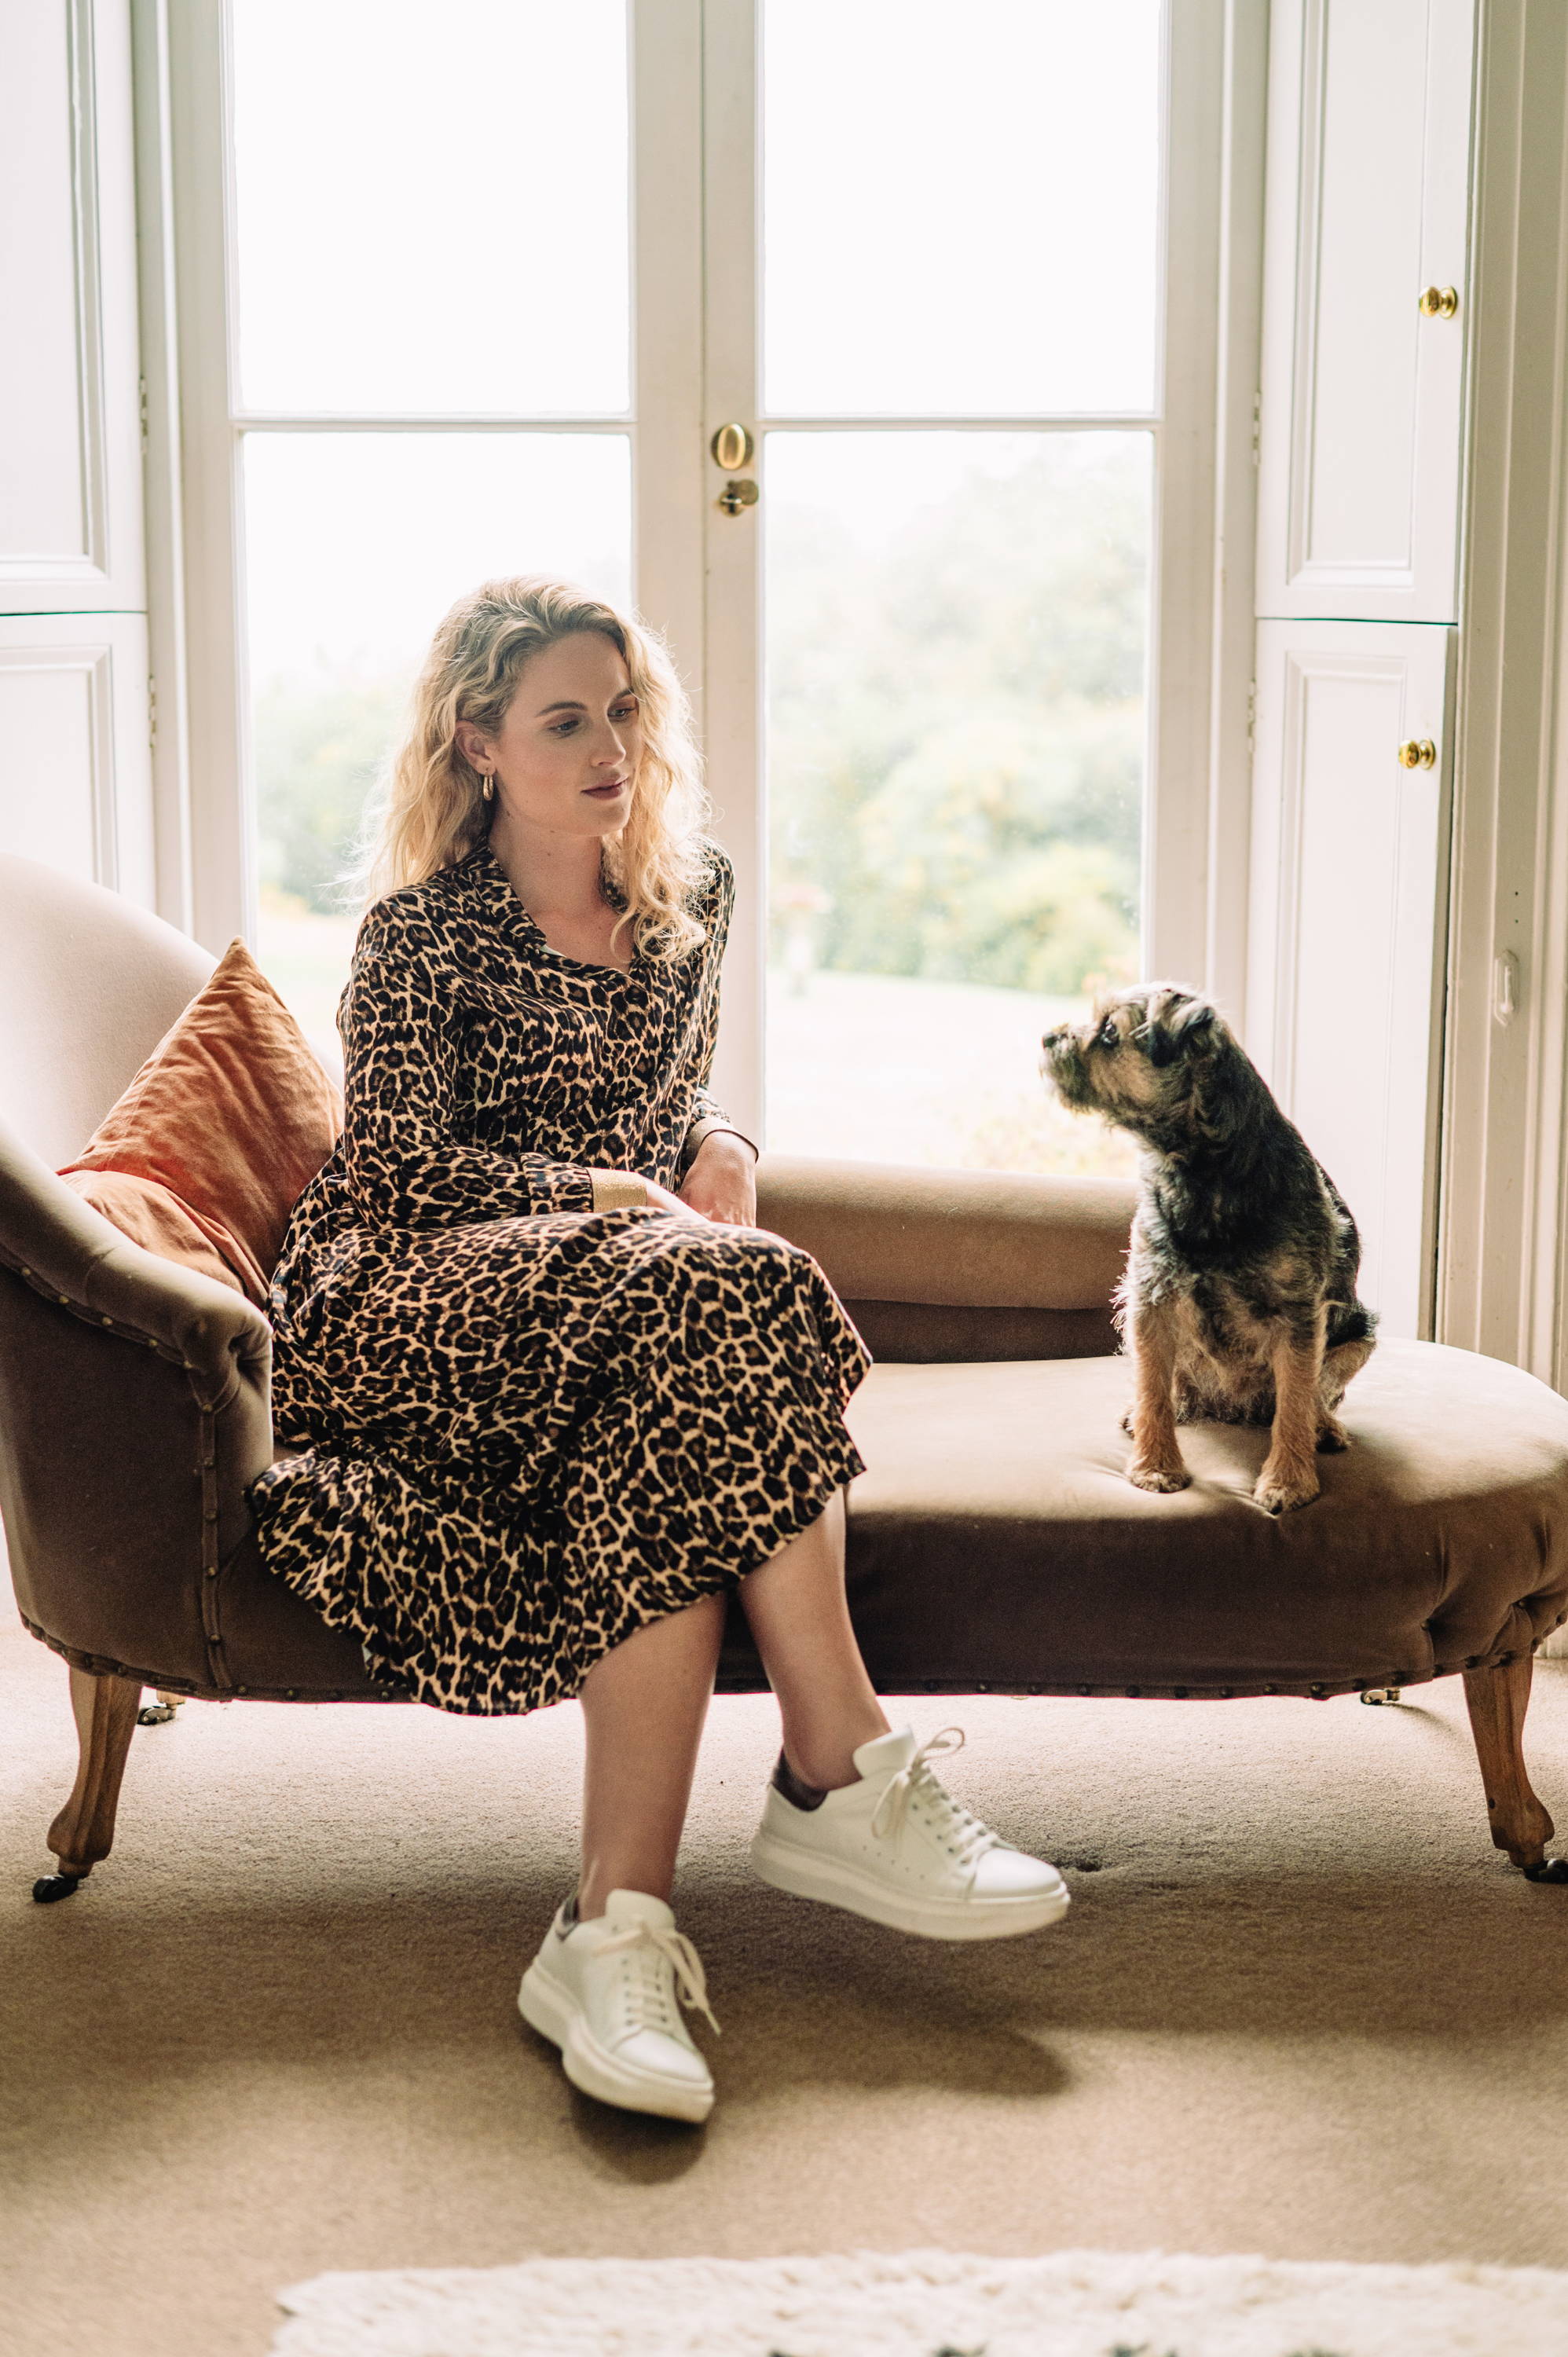 A model wearing a midi length leopard print dress with long sleeves and white trainers sitting on a golden chaise long with a small dog